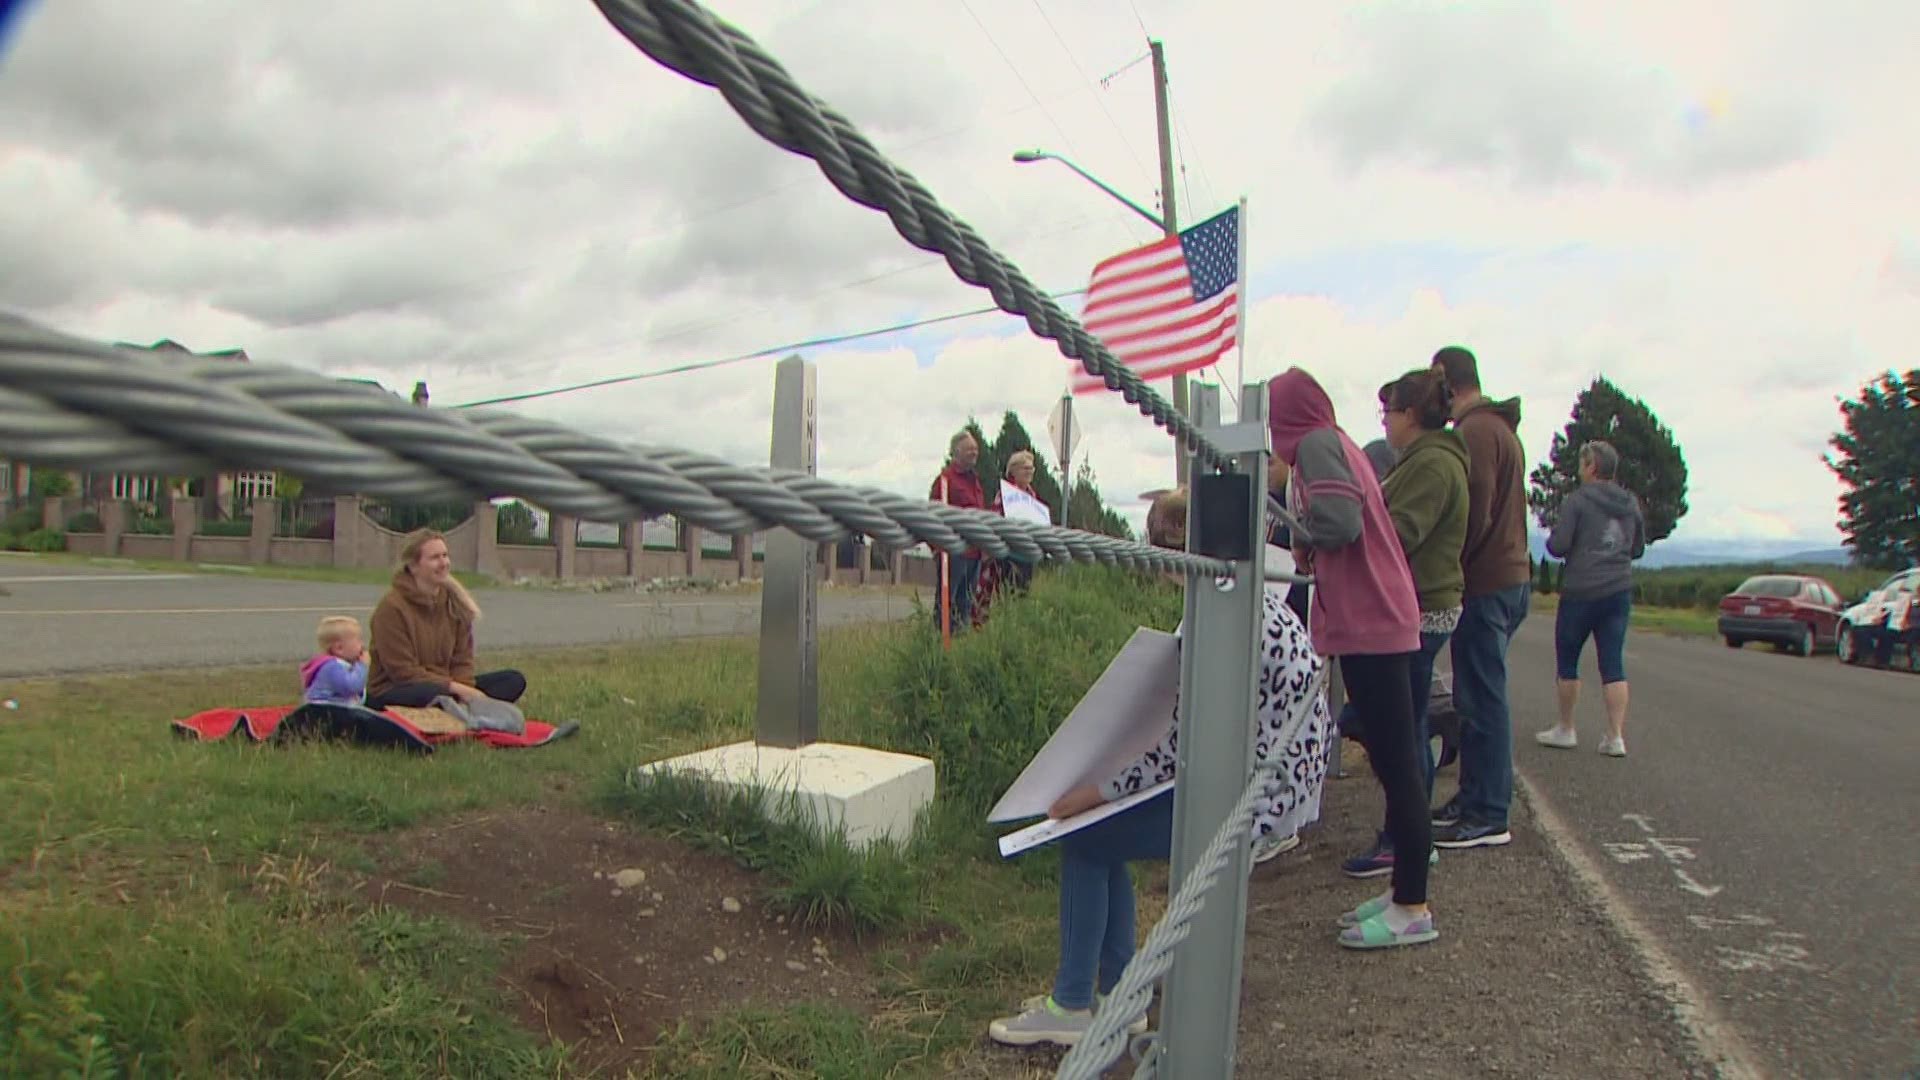 Every weekend one group of families separated by the border gathers on either side to call for Canada and the U.S. to reopen.